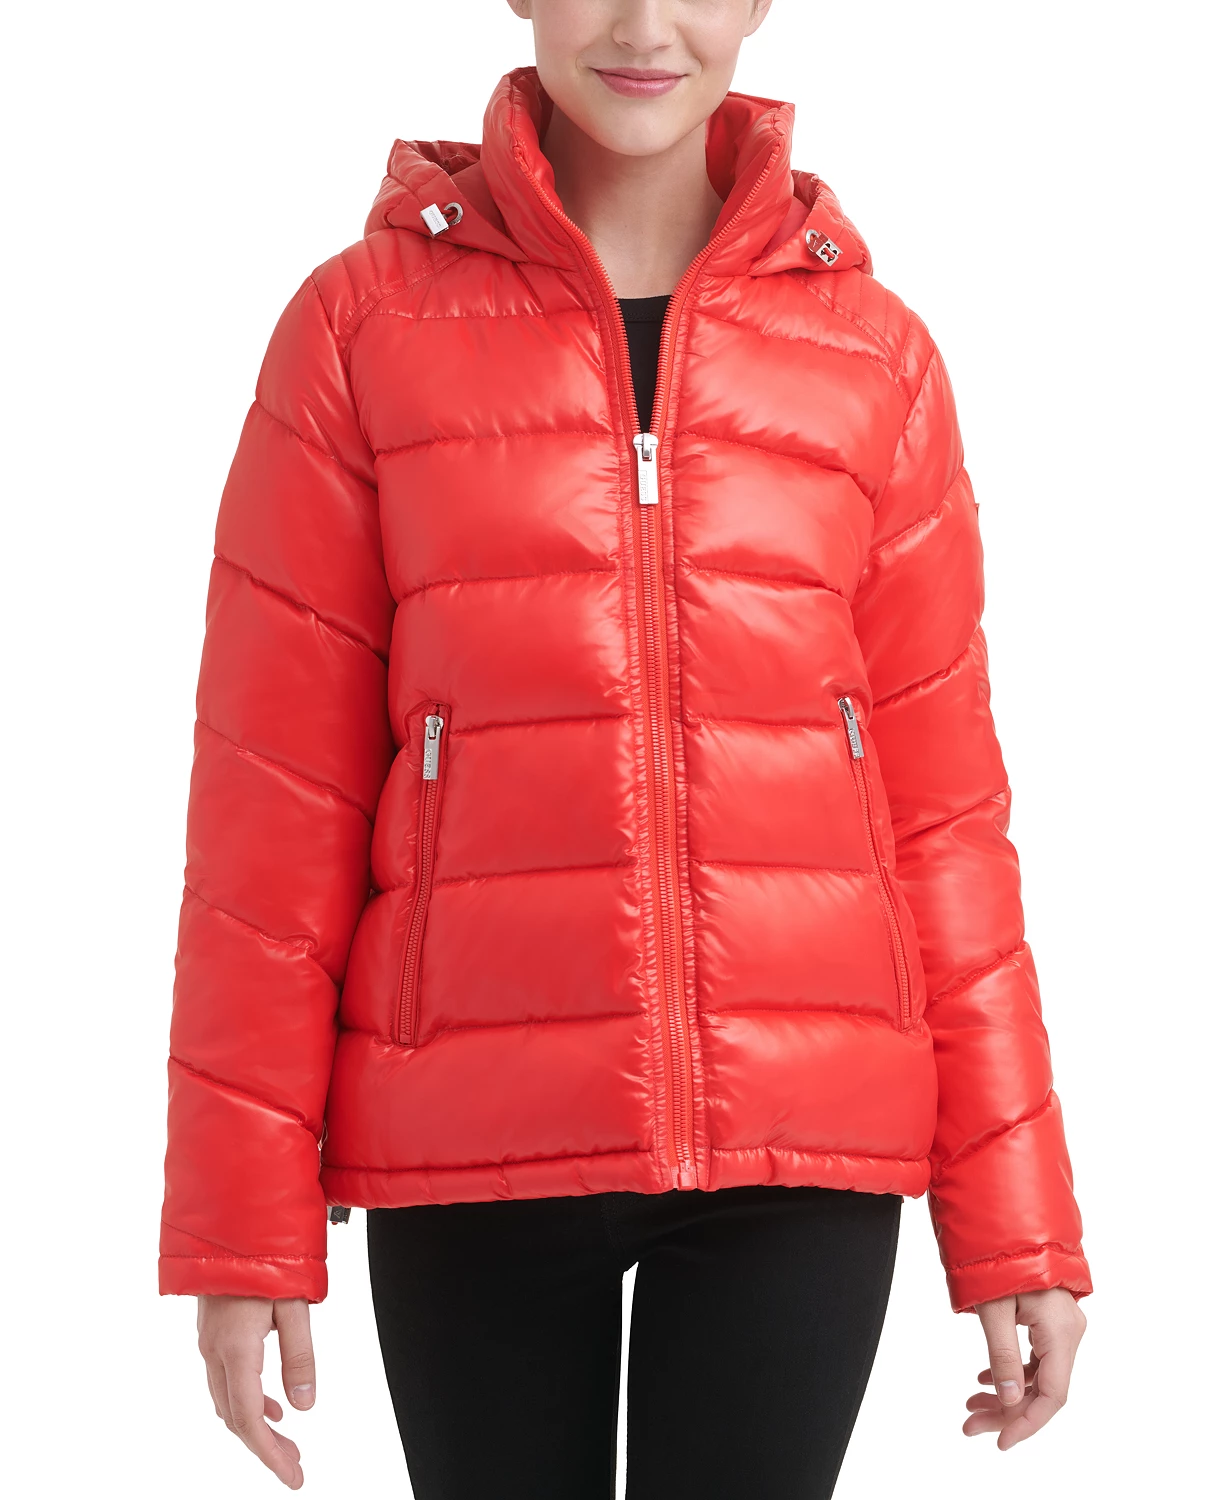 LEGO® Collection x Target Men's Color Block Puffer Jacket